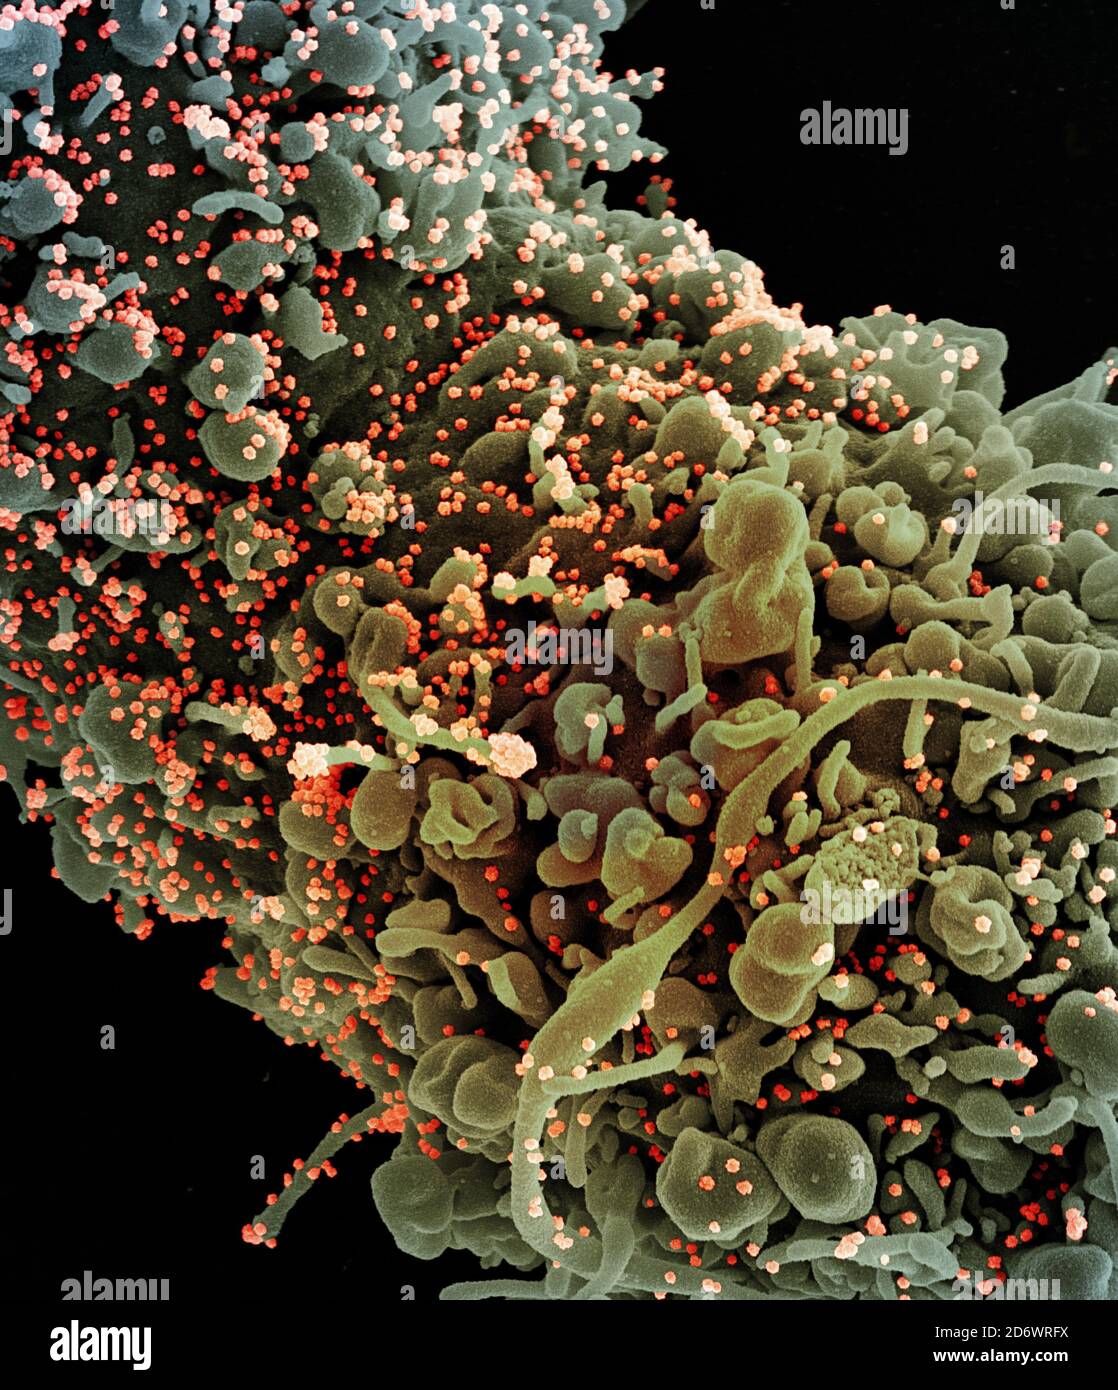 Colorized scanning electron micrograph of a cell showing morphological signs of apoptosis, infected with SARS-COV-2 virus particles (orange), isolated Stock Photo